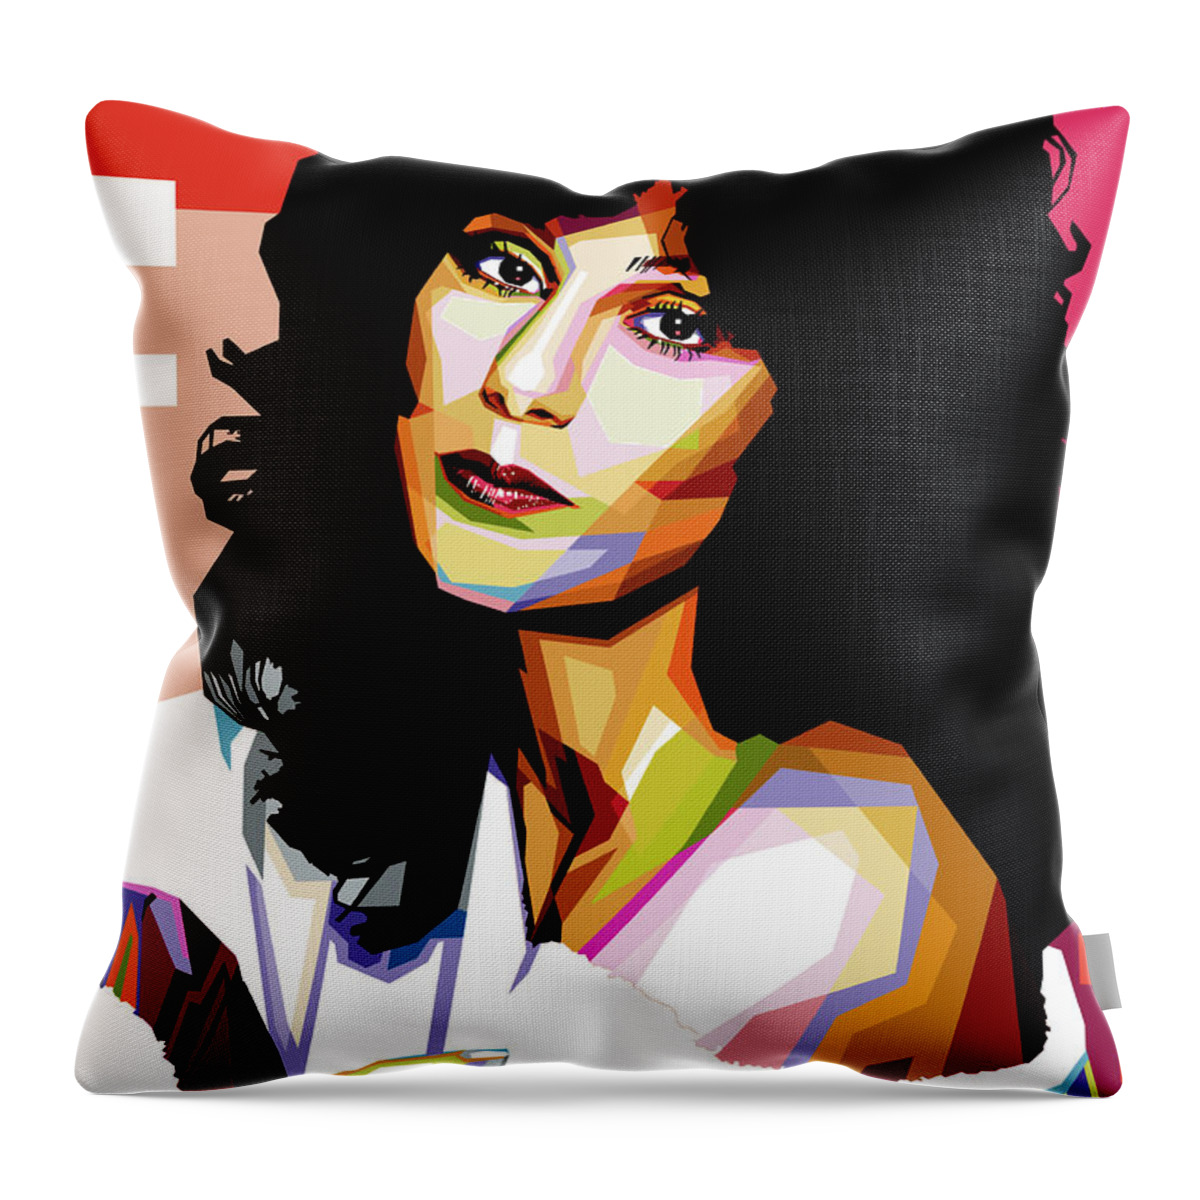 Cher Throw Pillow featuring the digital art Cher by Movie World Posters